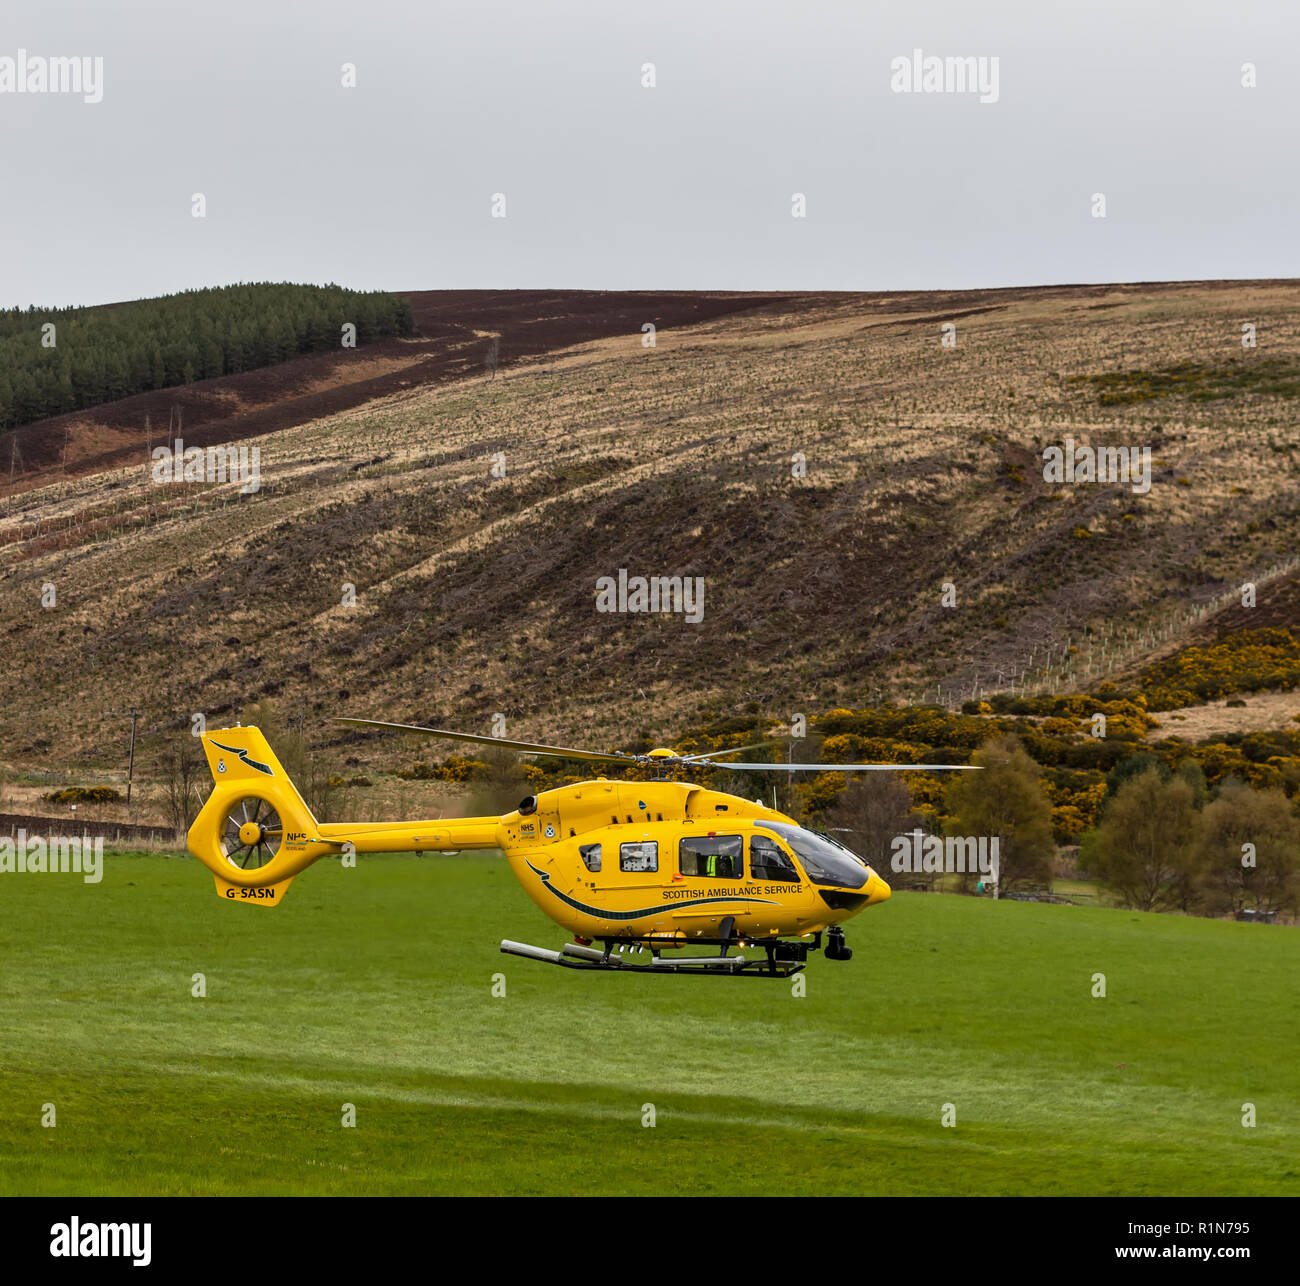 SCOTTISH AIR AMBULANCE - This is the Inverness based Scottish Air Ambulance taking off with a patient on Rothes Glen, Moray, Scotland. Stock Photo